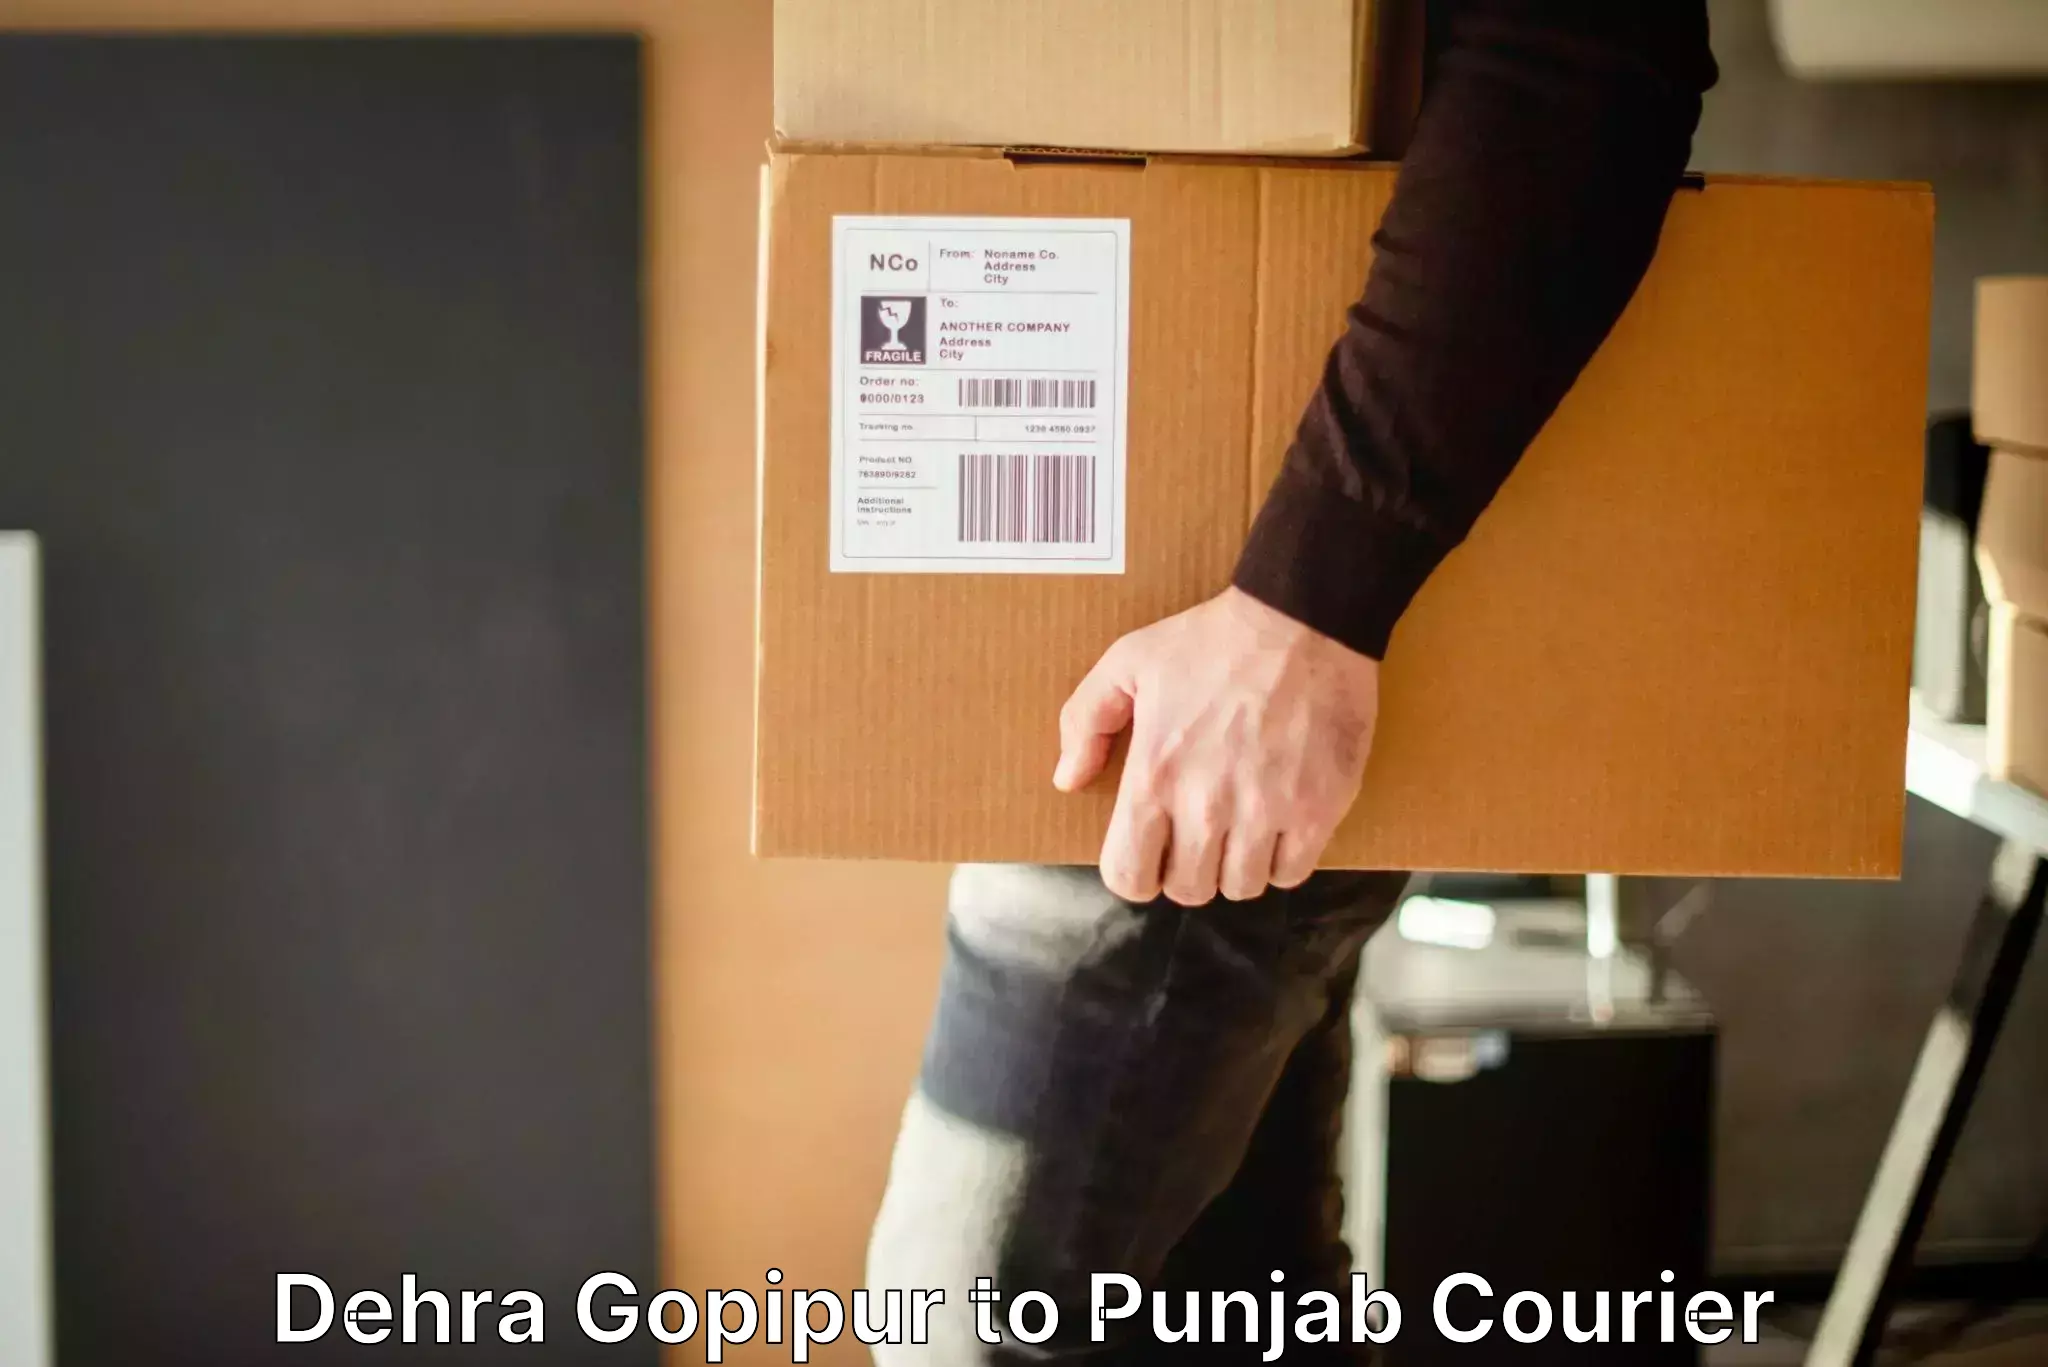 Baggage relocation service Dehra Gopipur to Thapar Institute of Engineering and Technology Patiala